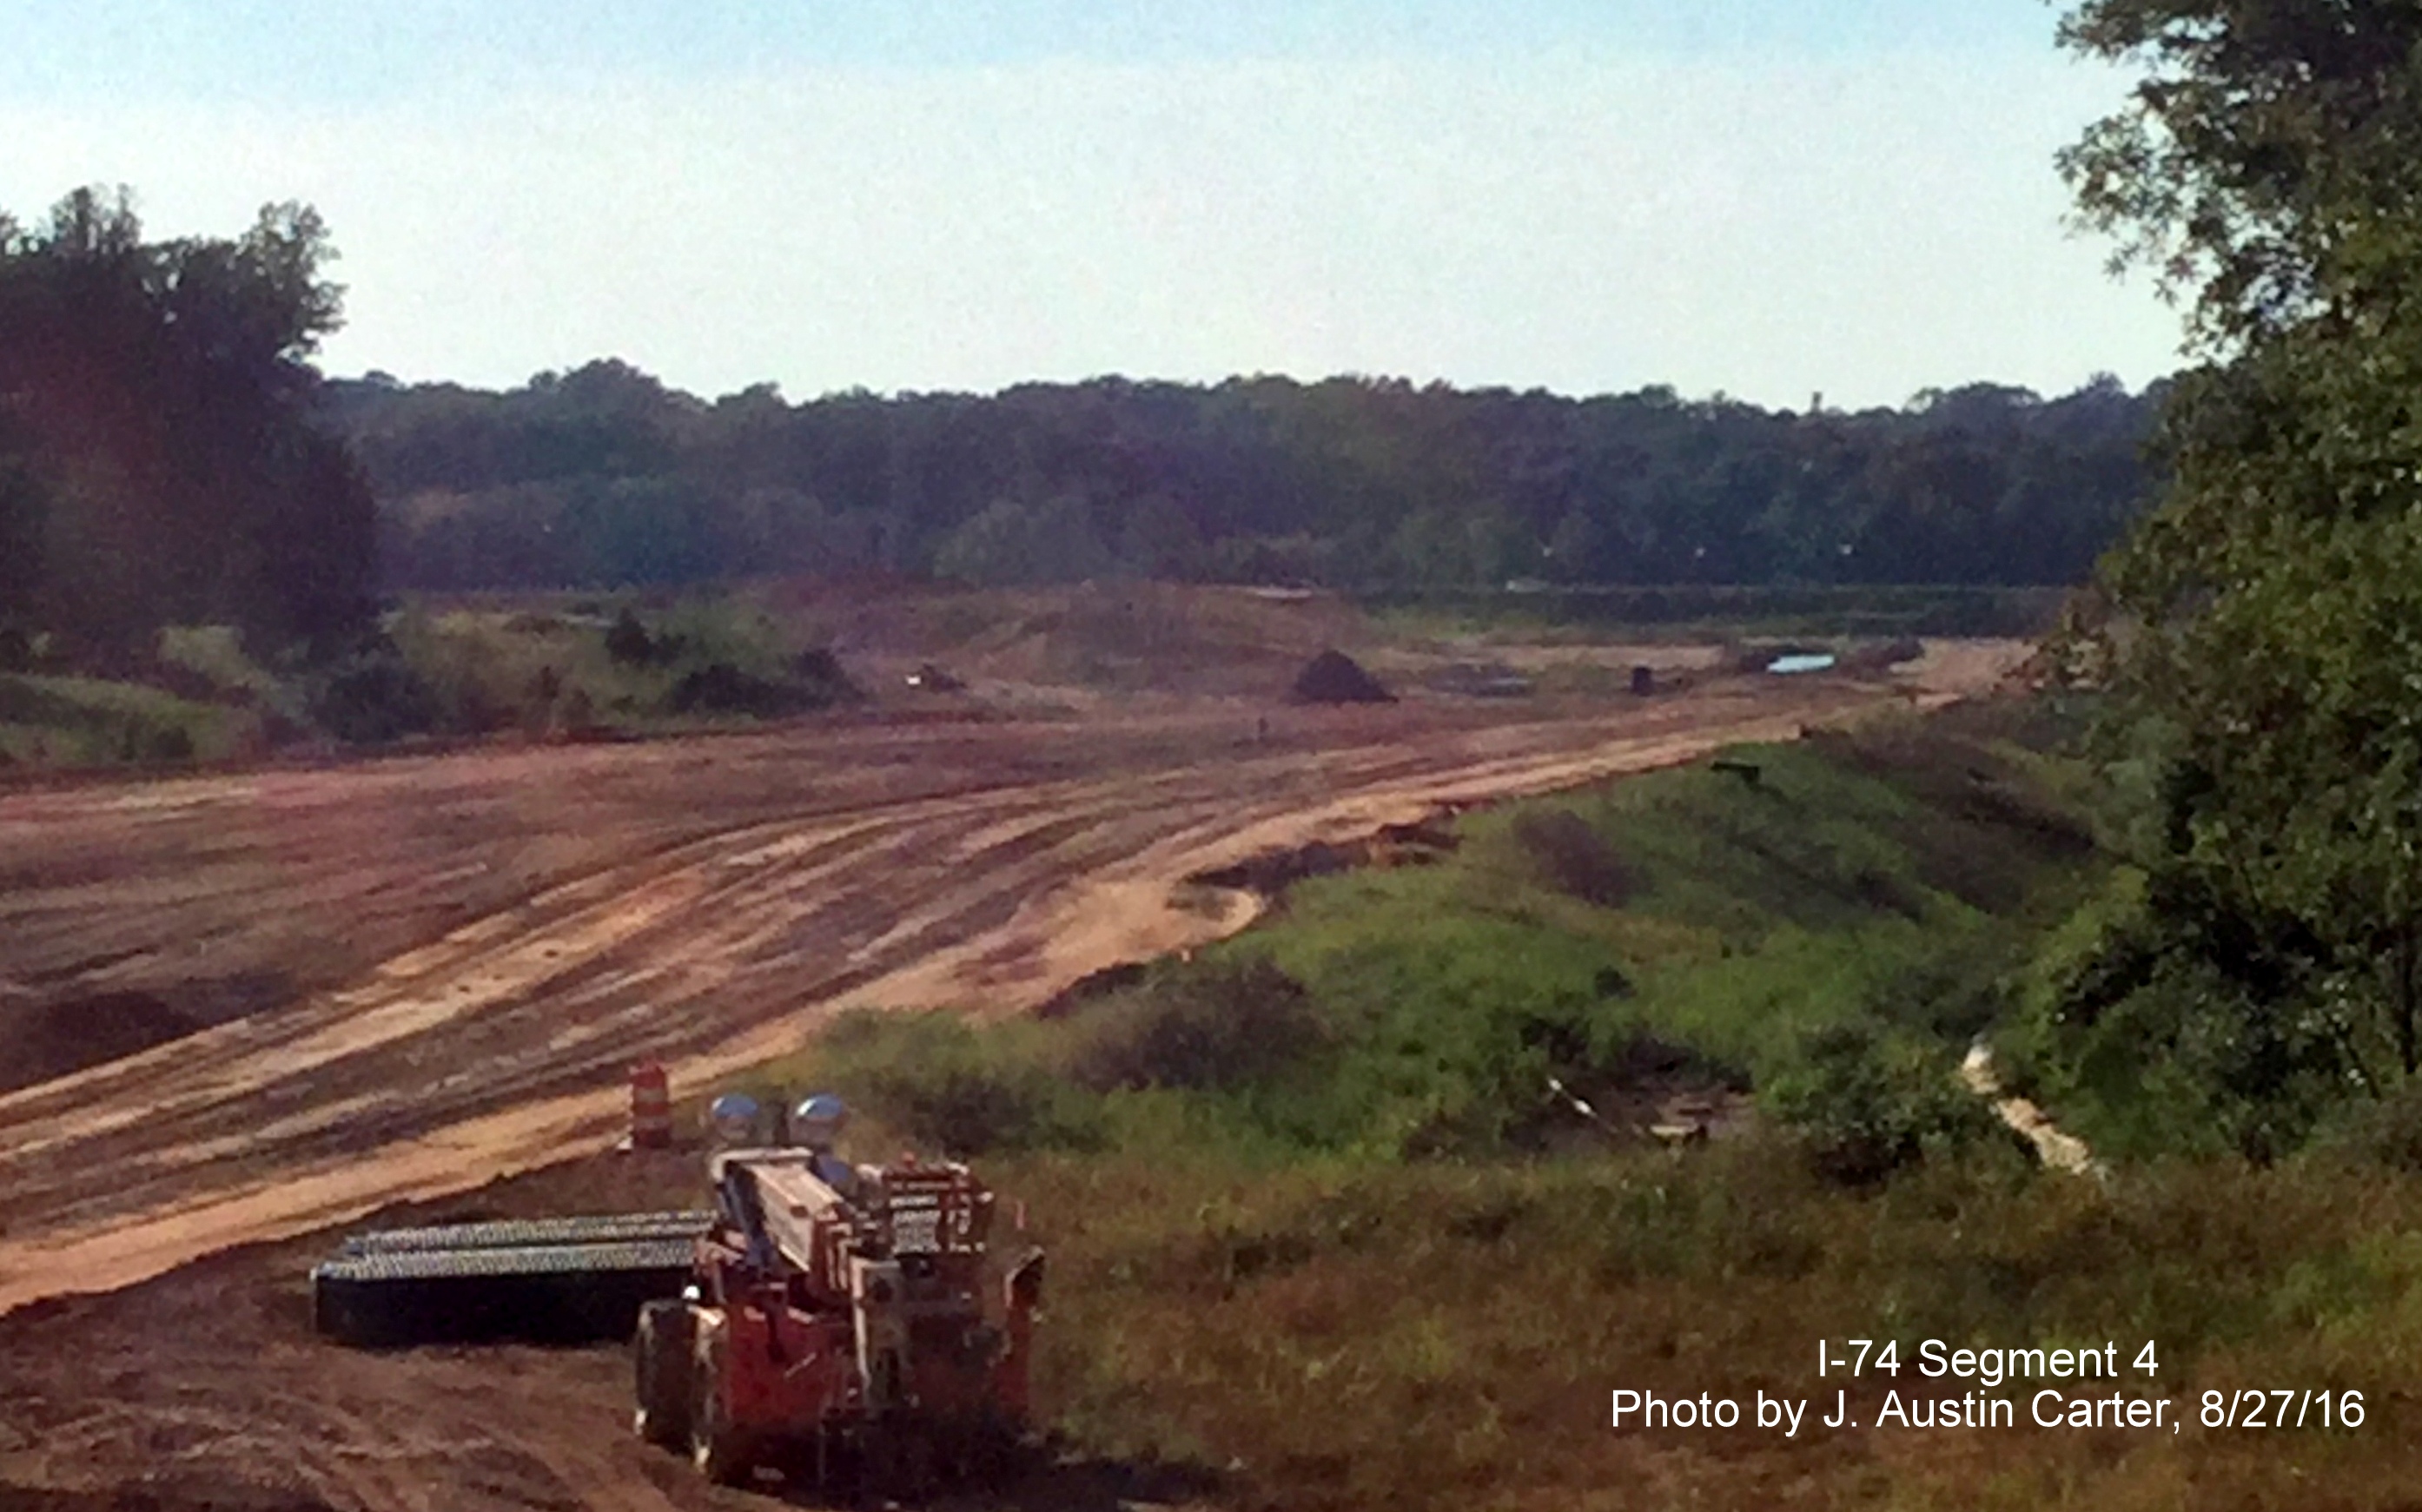 Image of close view of construction at site of future US 158 interchange on Winston-Salem Northern Beltway/I-74, taken by J. Austin Carter